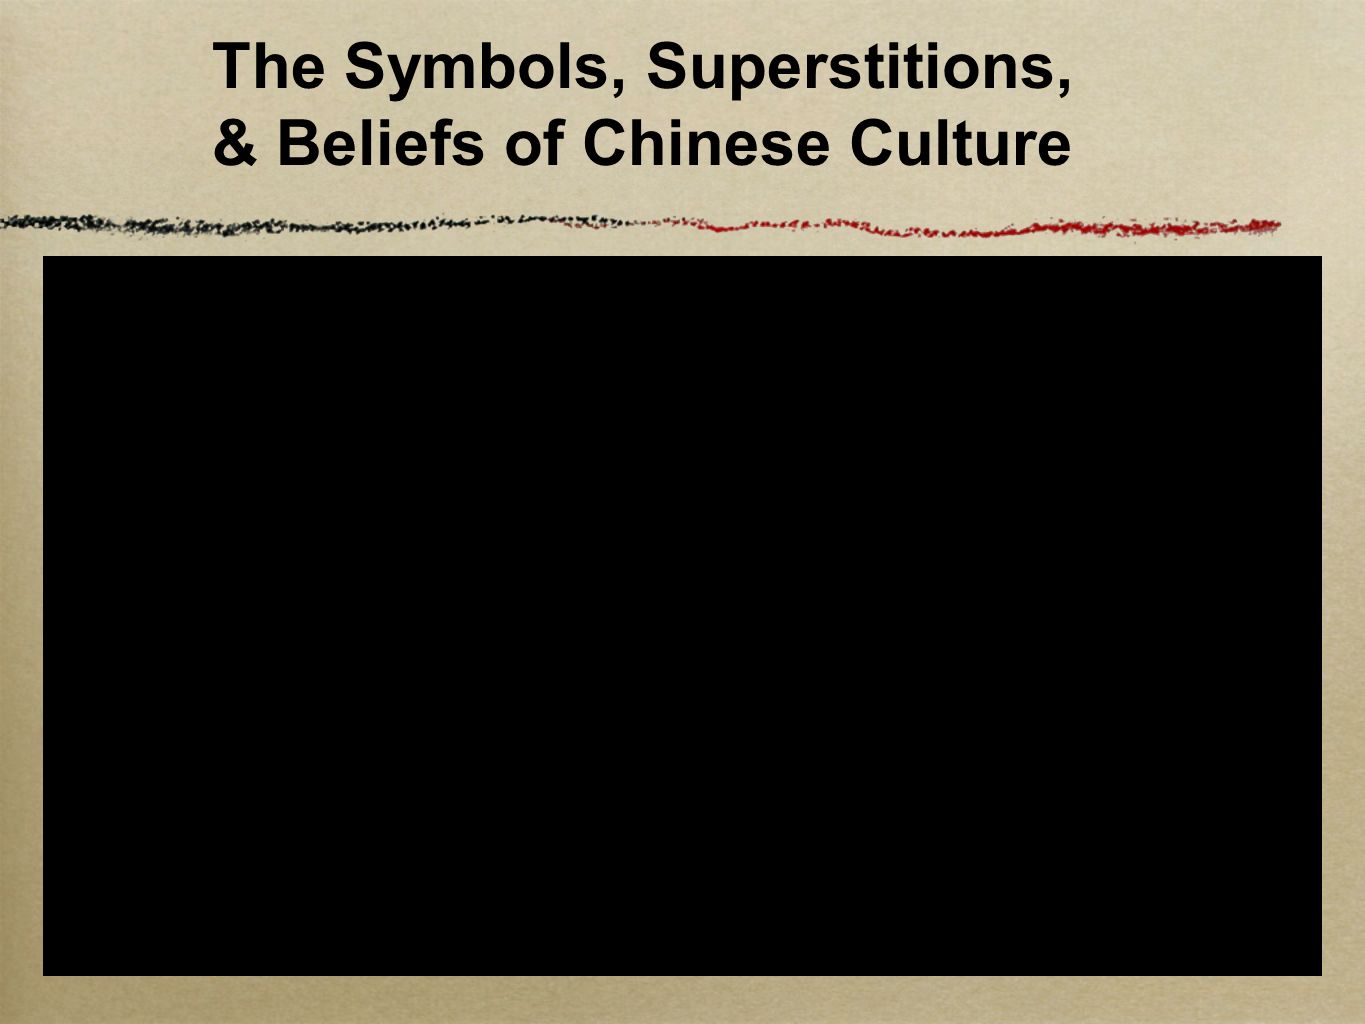 The Symbols, Superstitions, & Beliefs of Chinese Culture